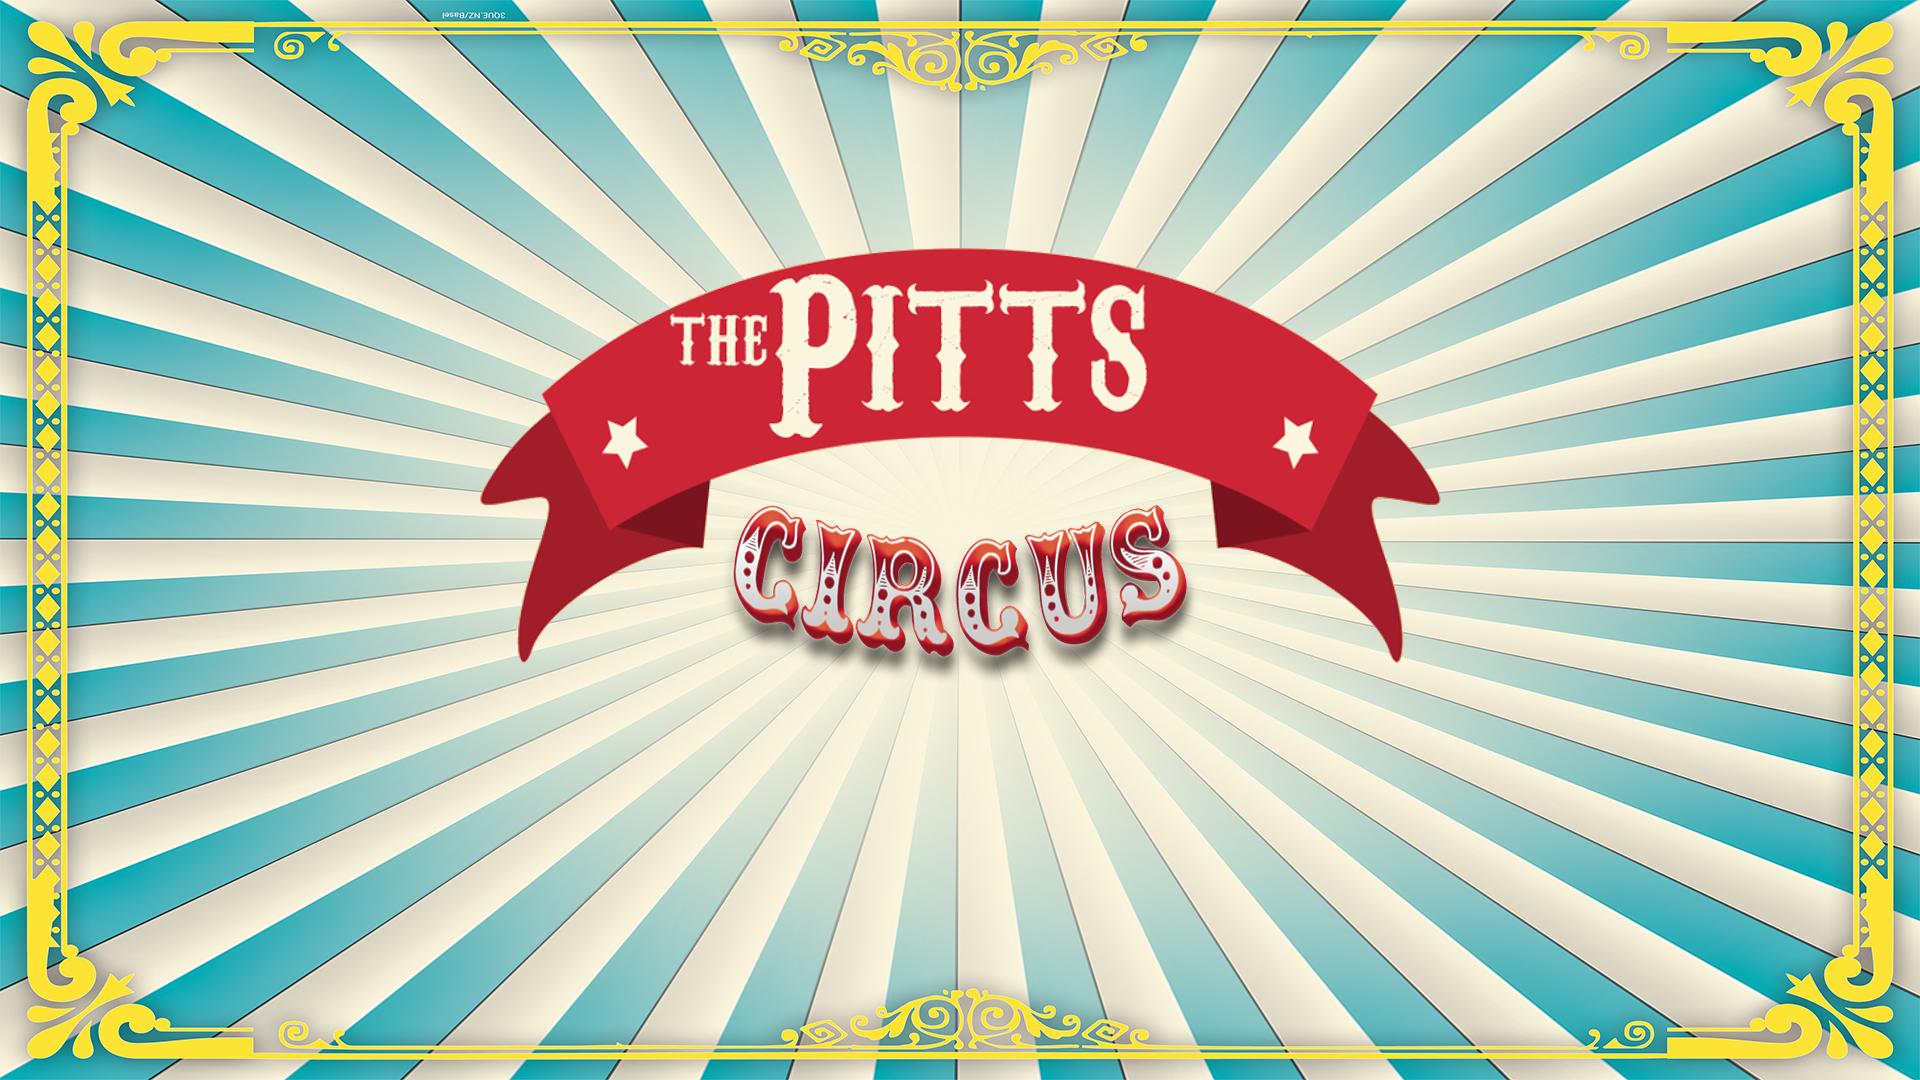 The Pitts Circus Family